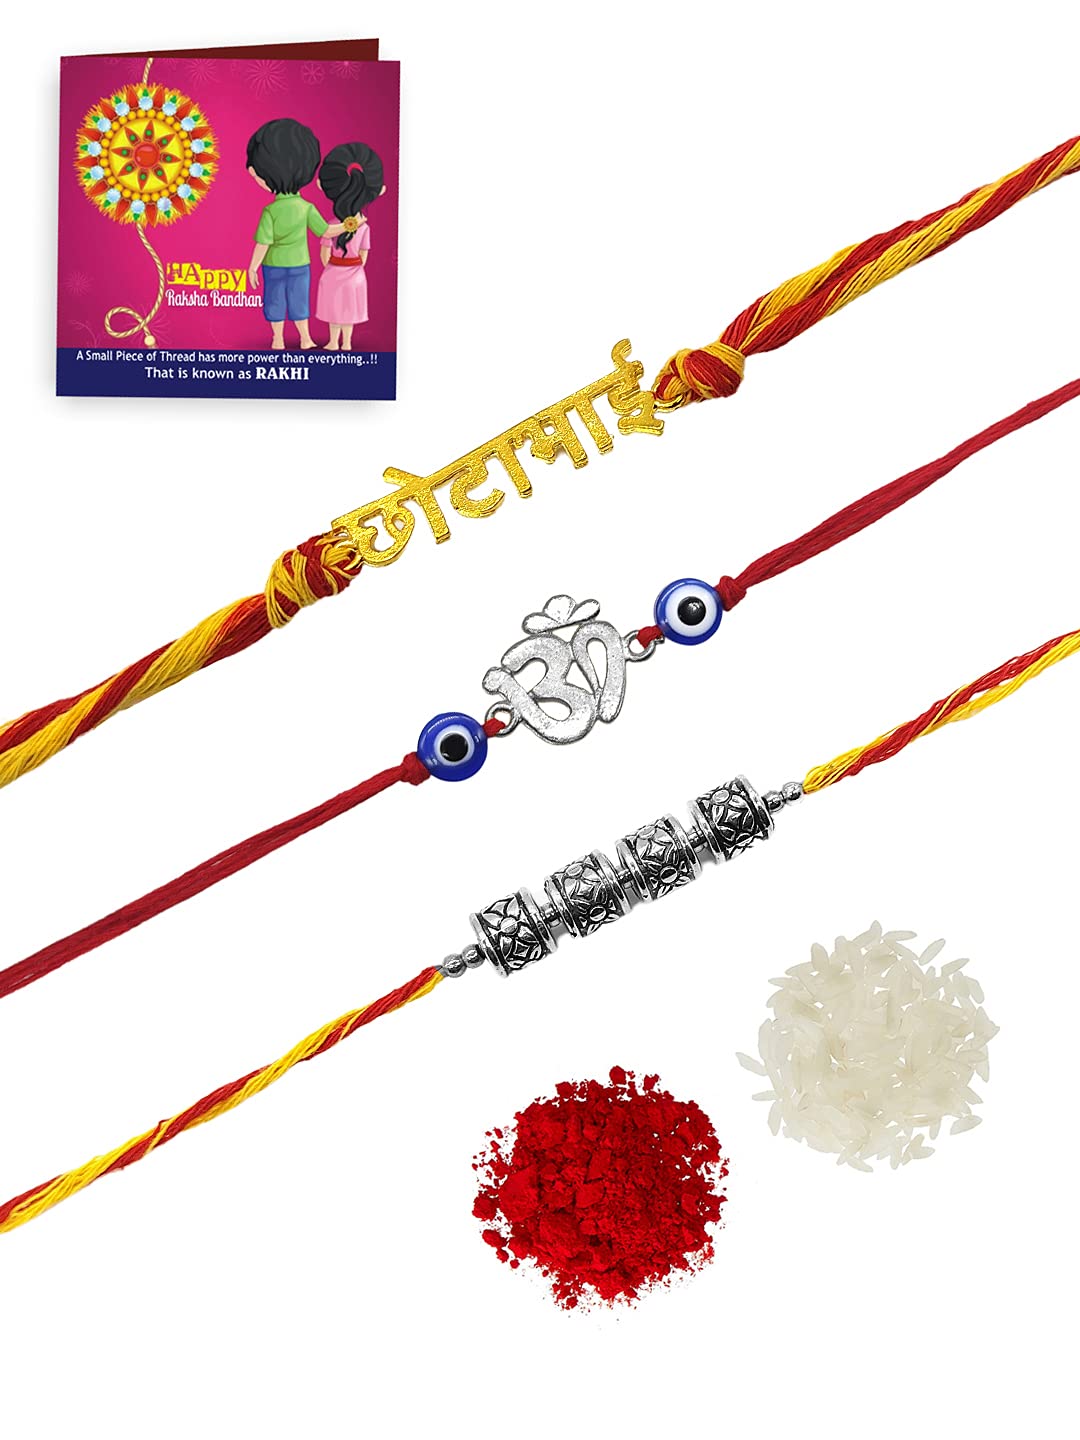 Yellow Chimes Combo of 3 Pcs Handmade Dori Worked Gold and Silver Toned OM Design Evil Eye Beads Chota Bhai Engraved Rakhi for Brother with Roli & Chawal, Red, Silver, Gold, Medium For Men